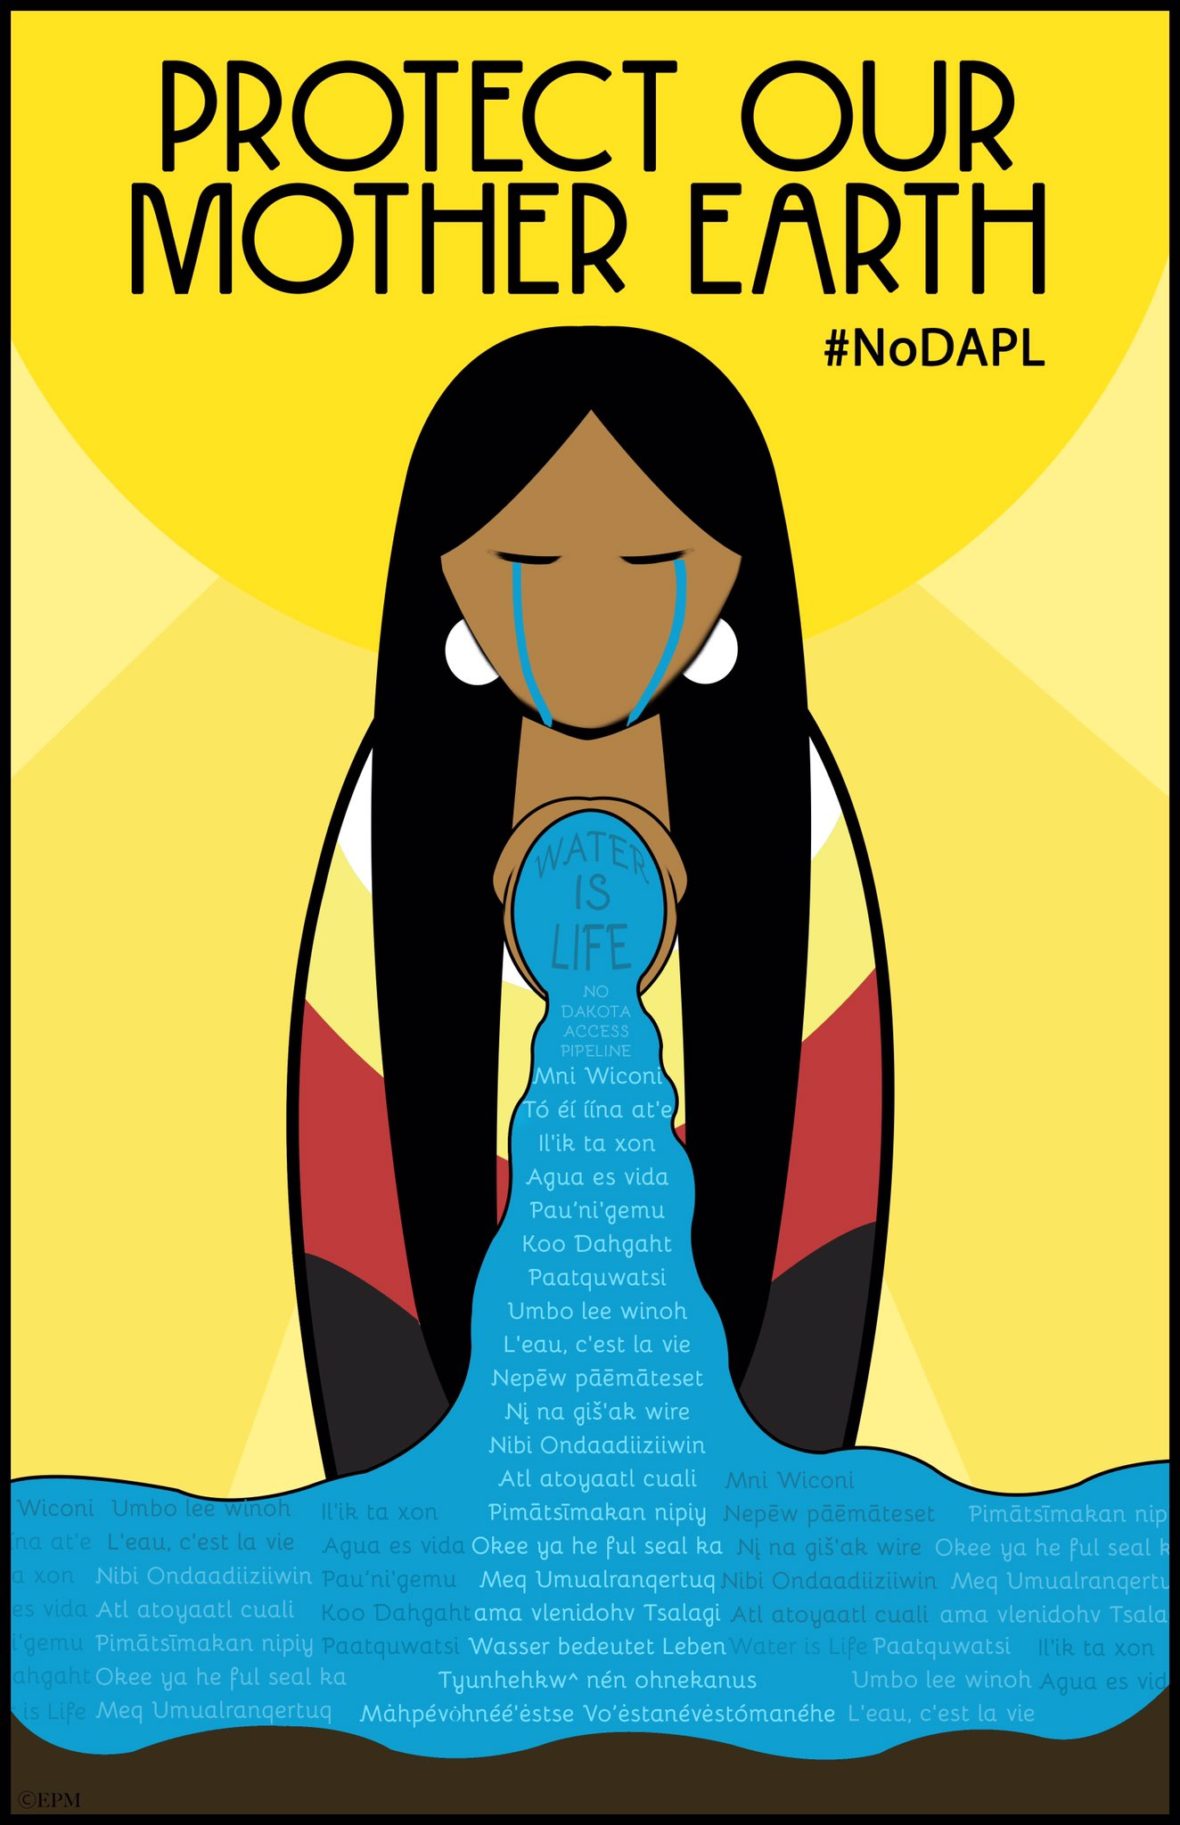 created by artist Erica Moore in support of #noDAPL